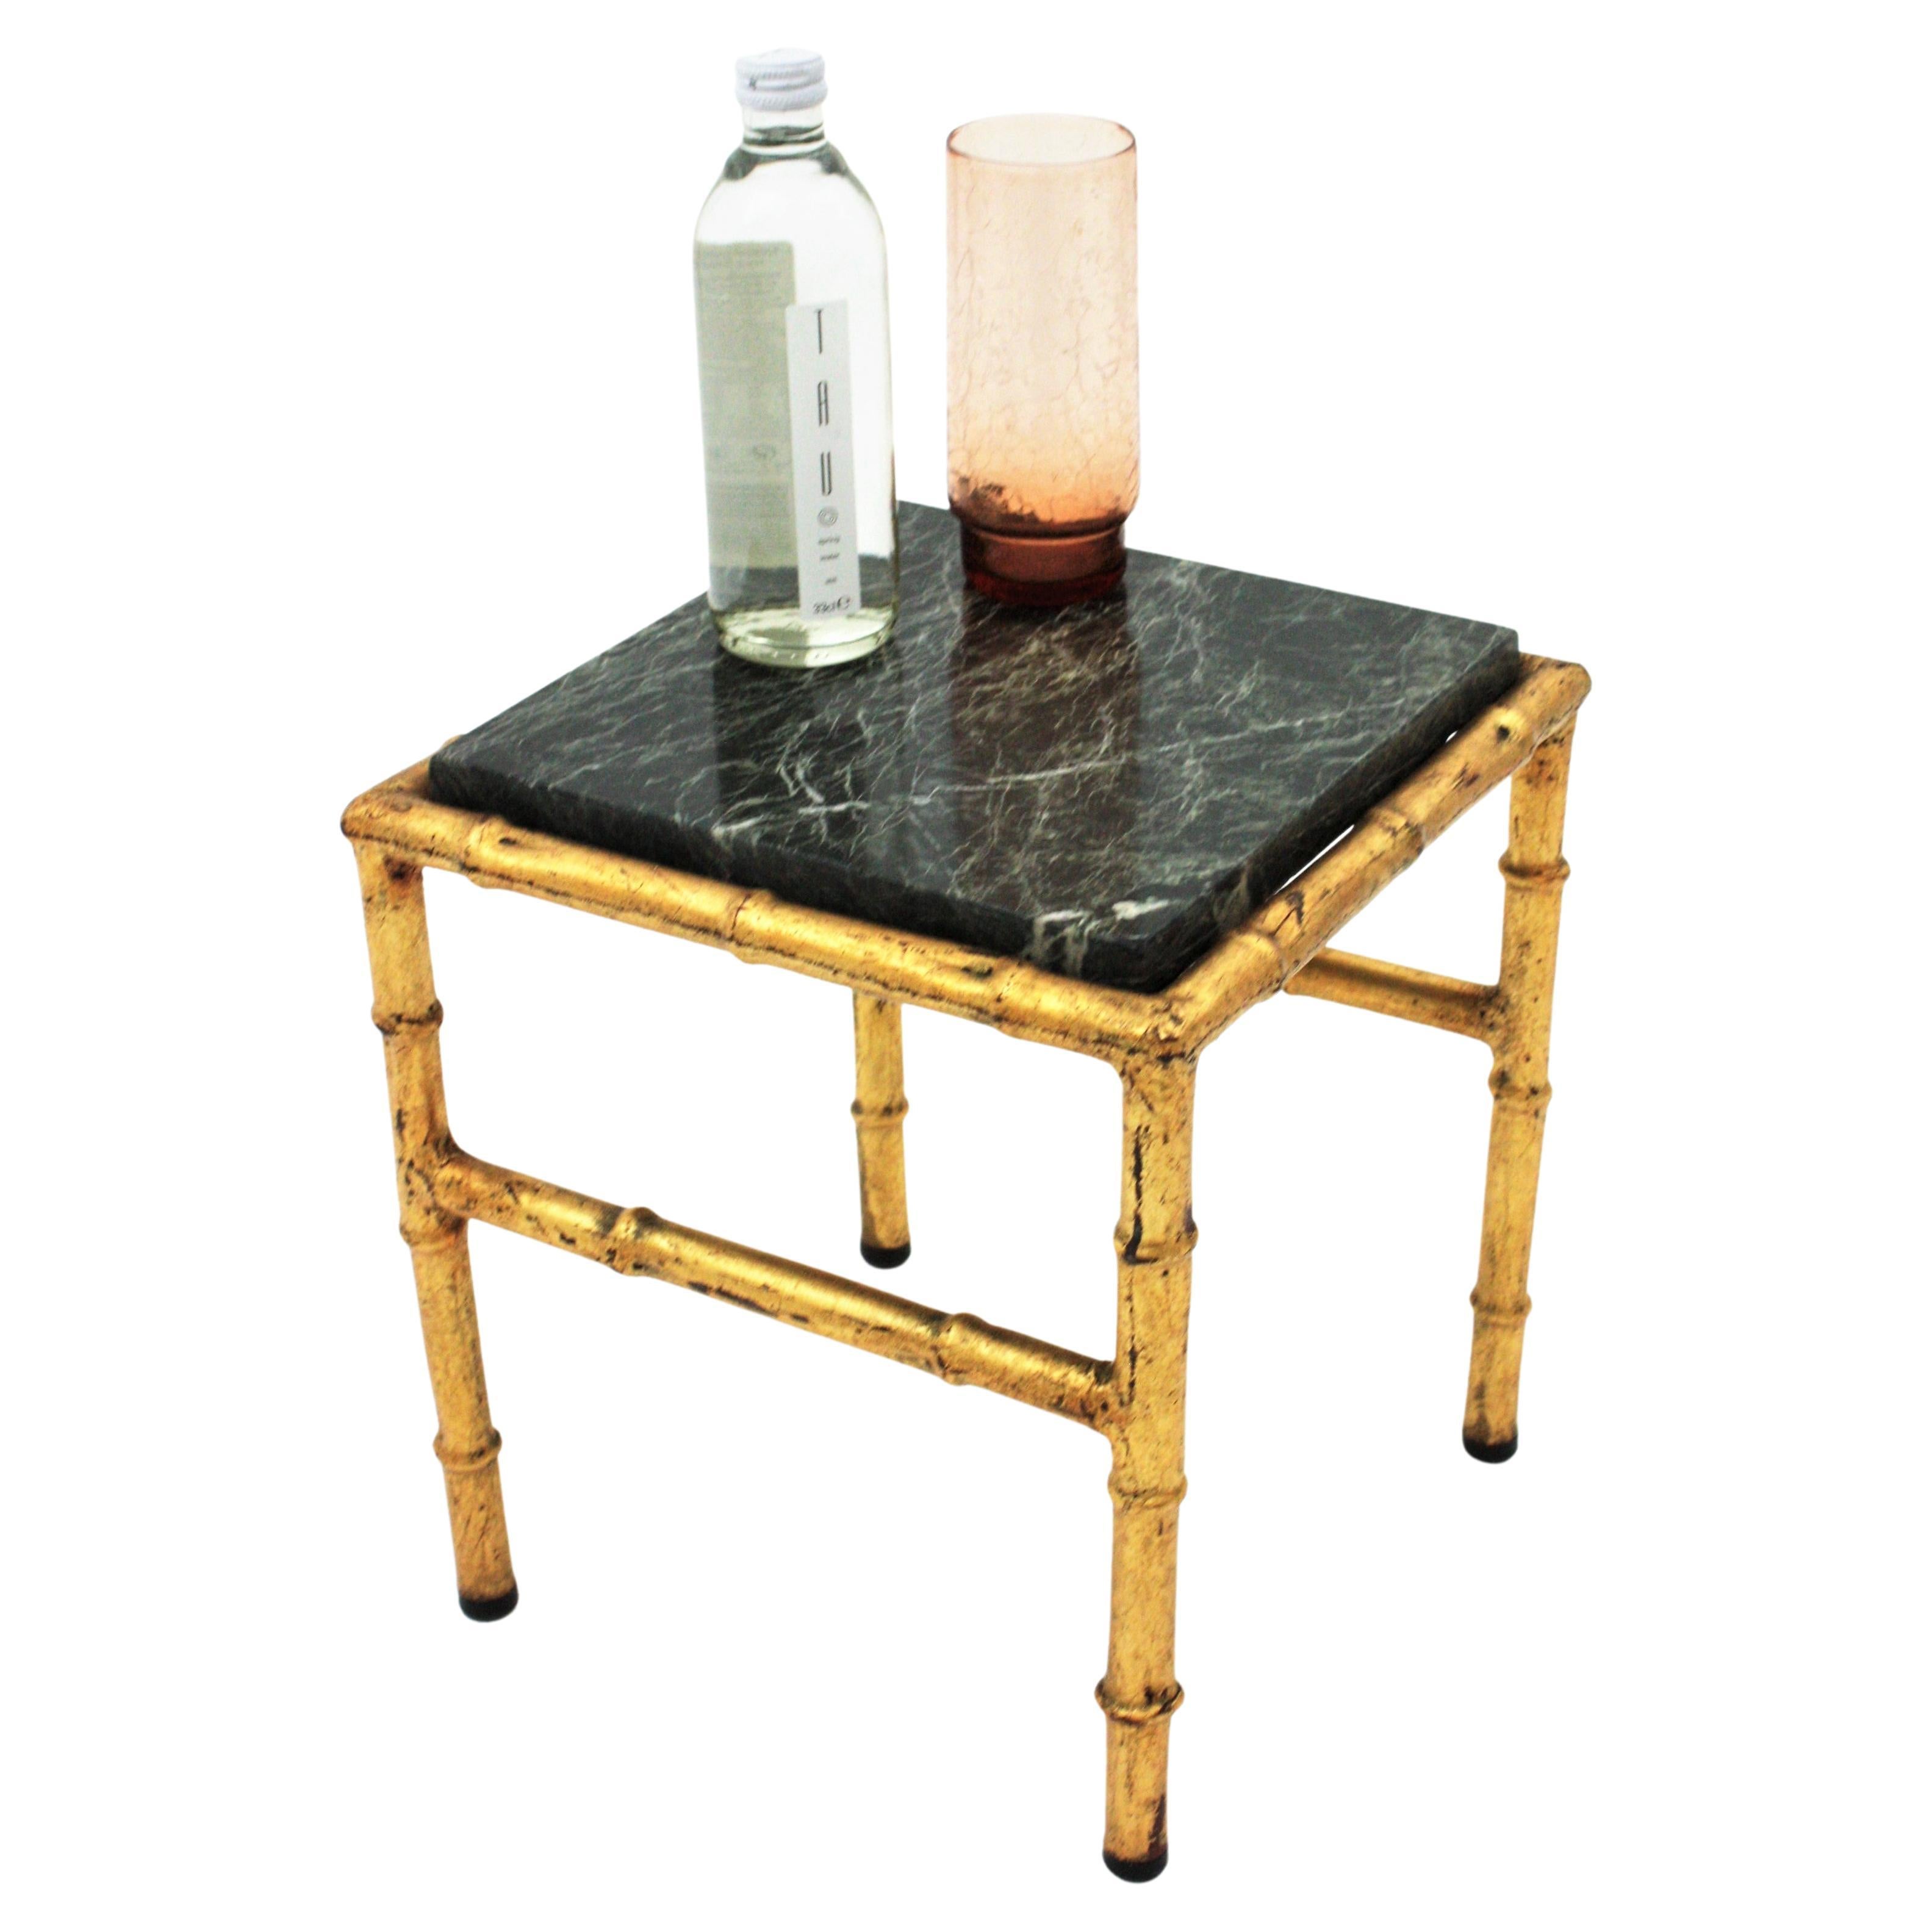 Elegant gold leaf gilt iron faux bamboo side table with green marble top, France, 1940s.
This lovely low table has a clean design featuring an iron faux bamboo structure finished in gold leaf and a green marble top with white veins.
It will be a